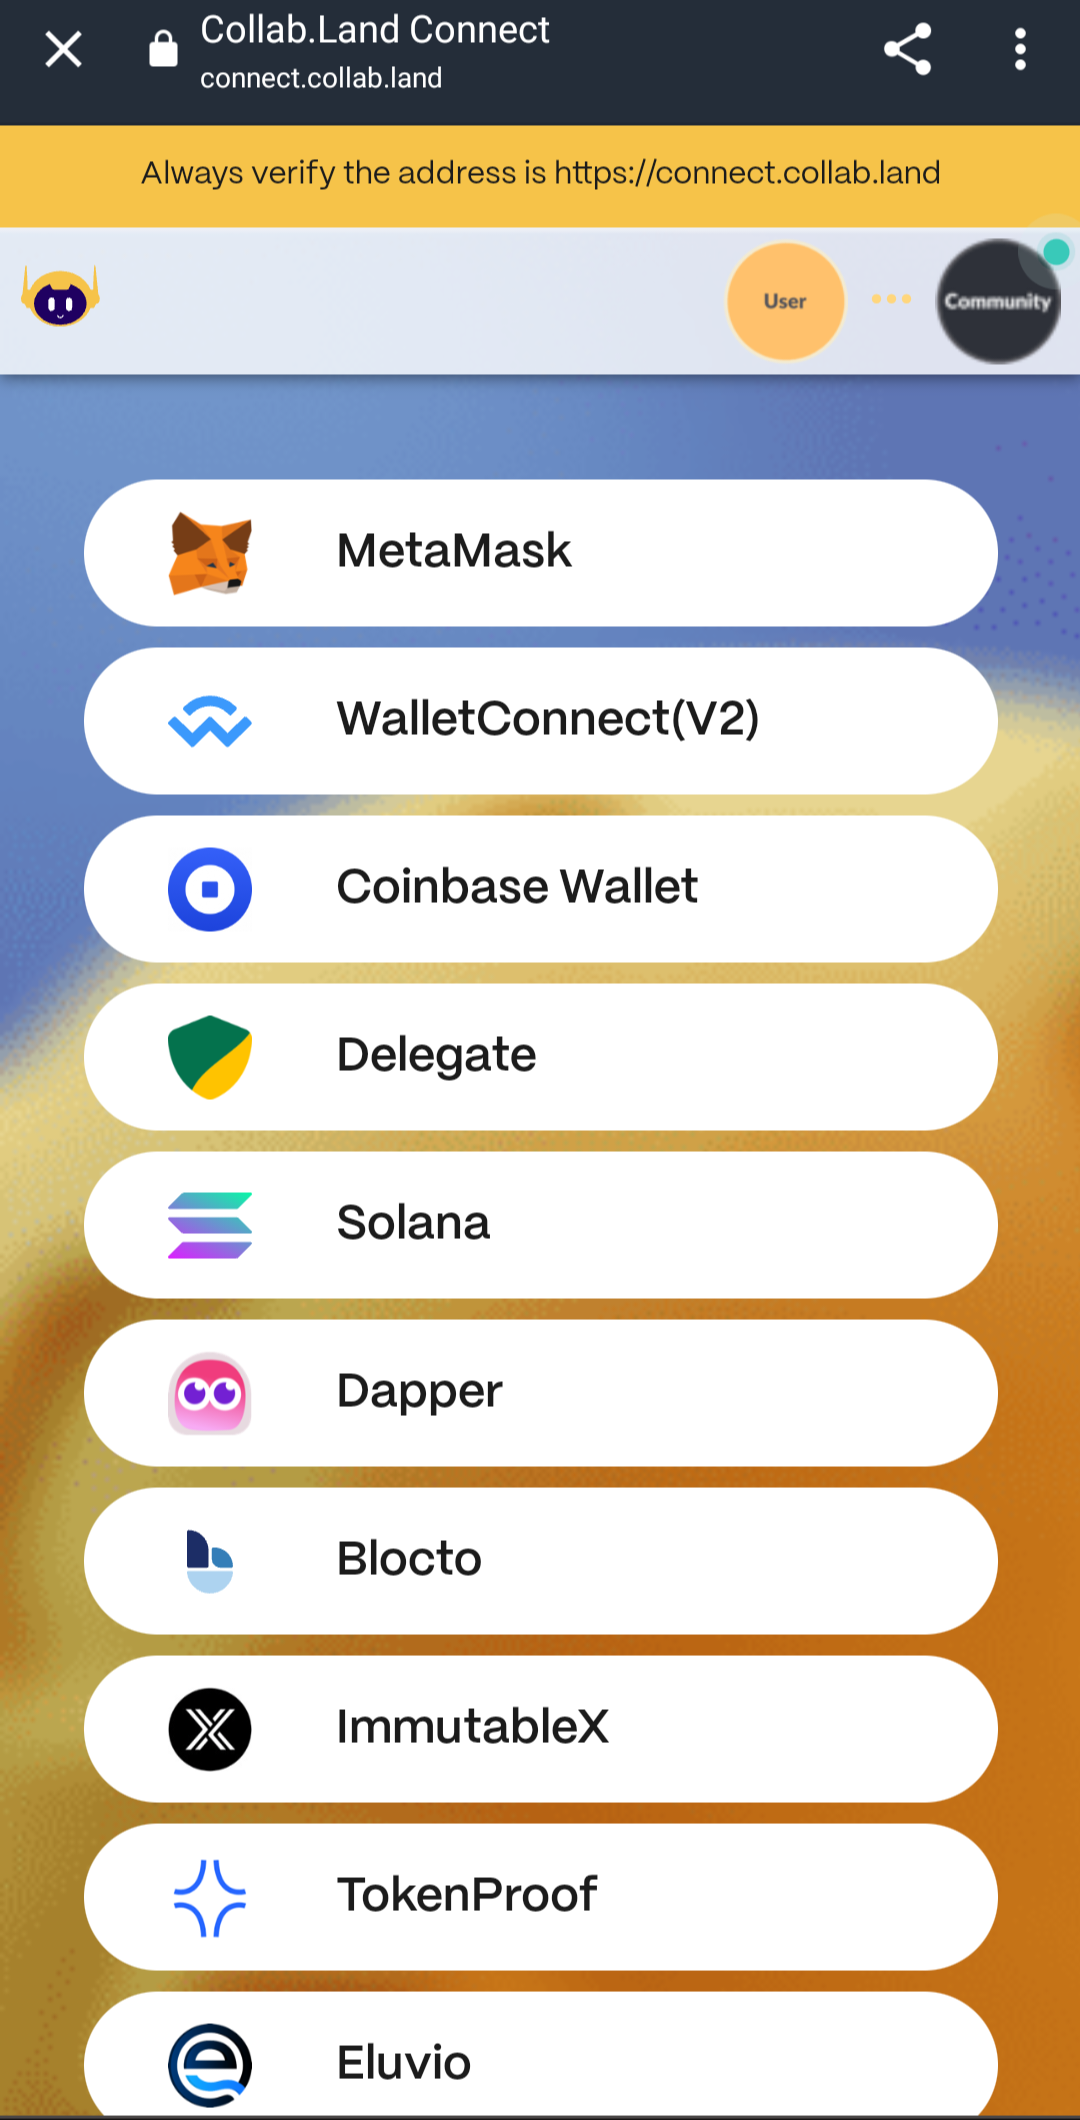 Select your wallet to verify